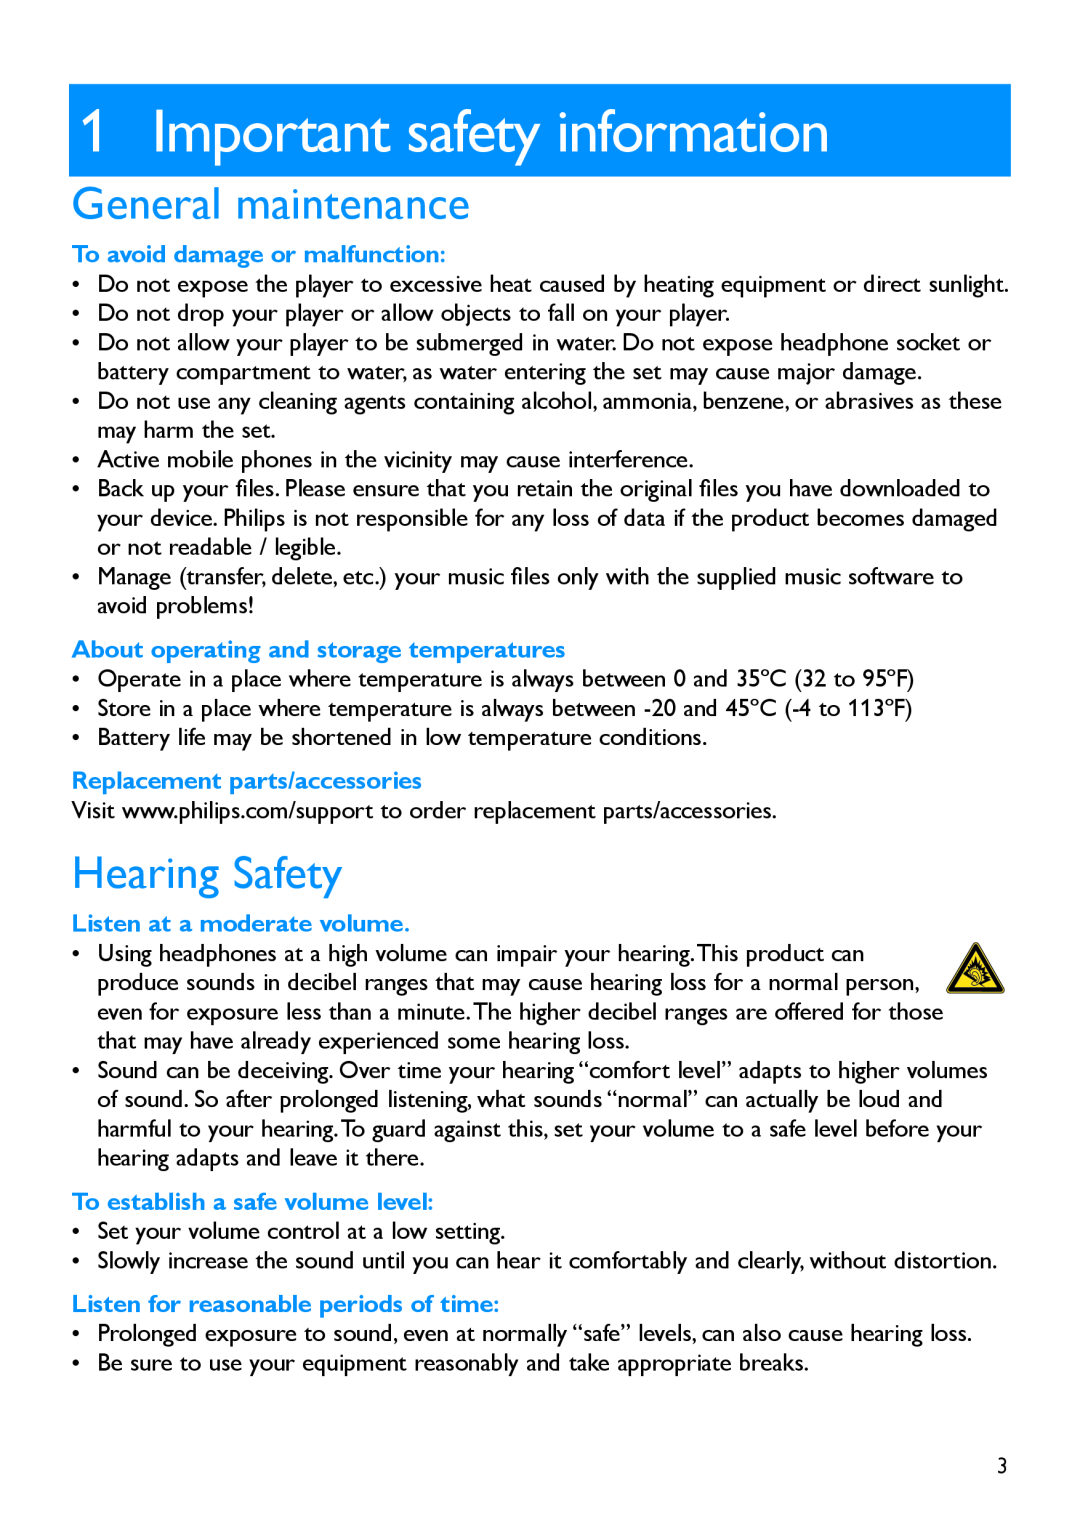 Philips SA5225, SA5295 Important safety information, General maintenance, Hearing Safety, To avoid damage or malfunction 